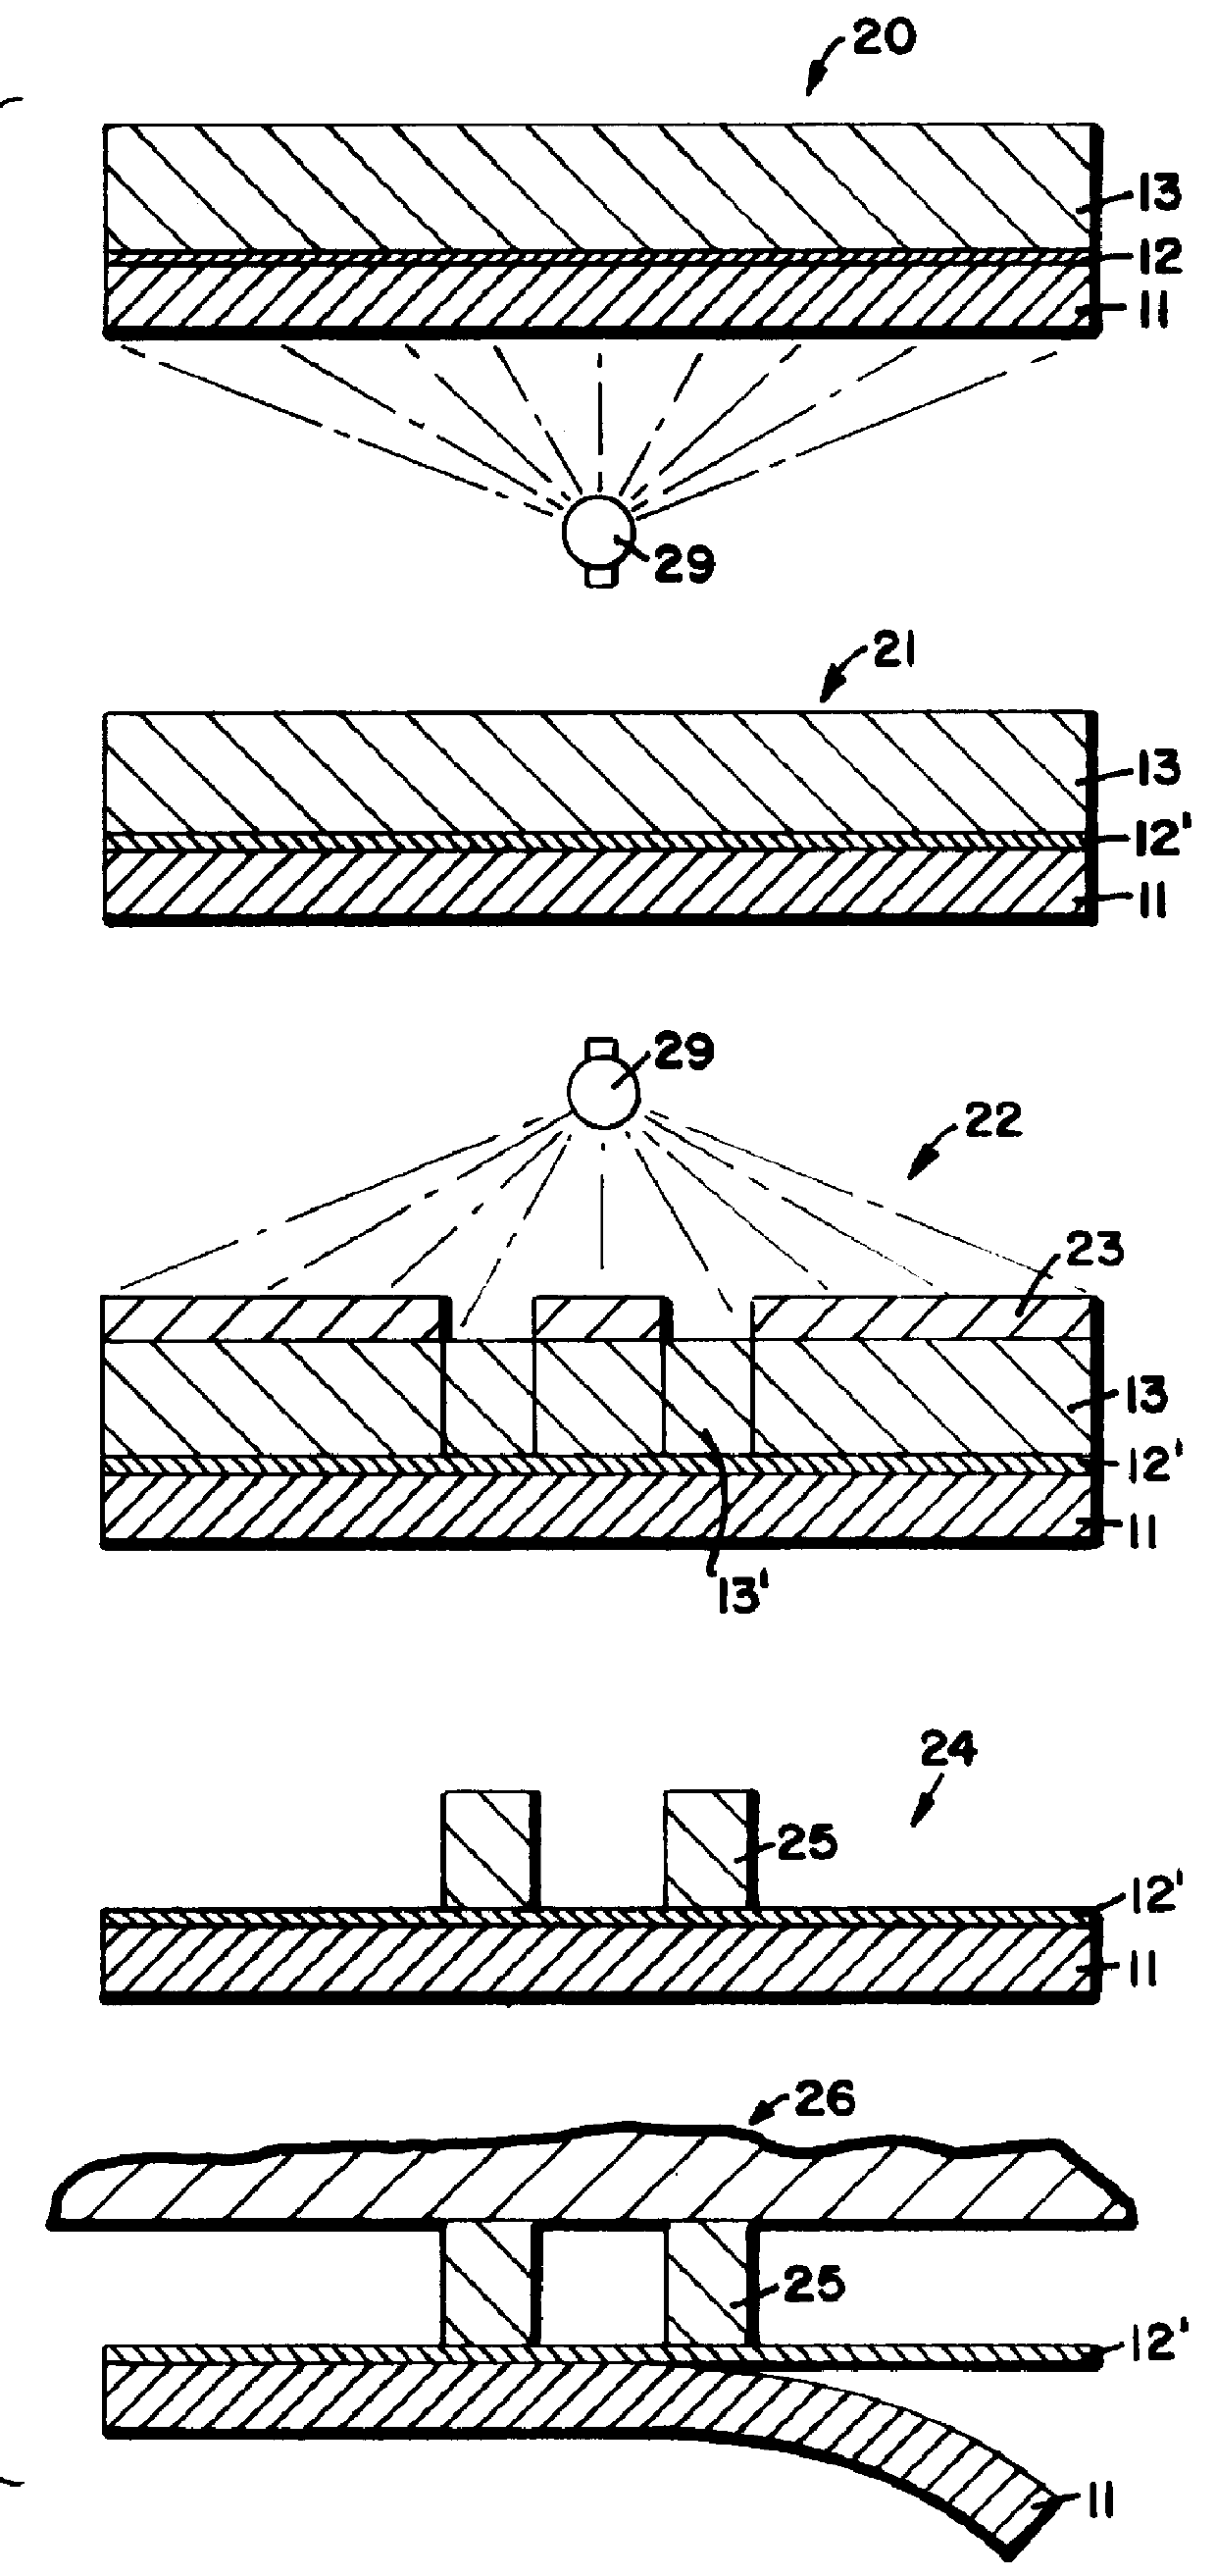 Integral membrane layer formed from a photosensitive layer in an imageable photoresist laminate